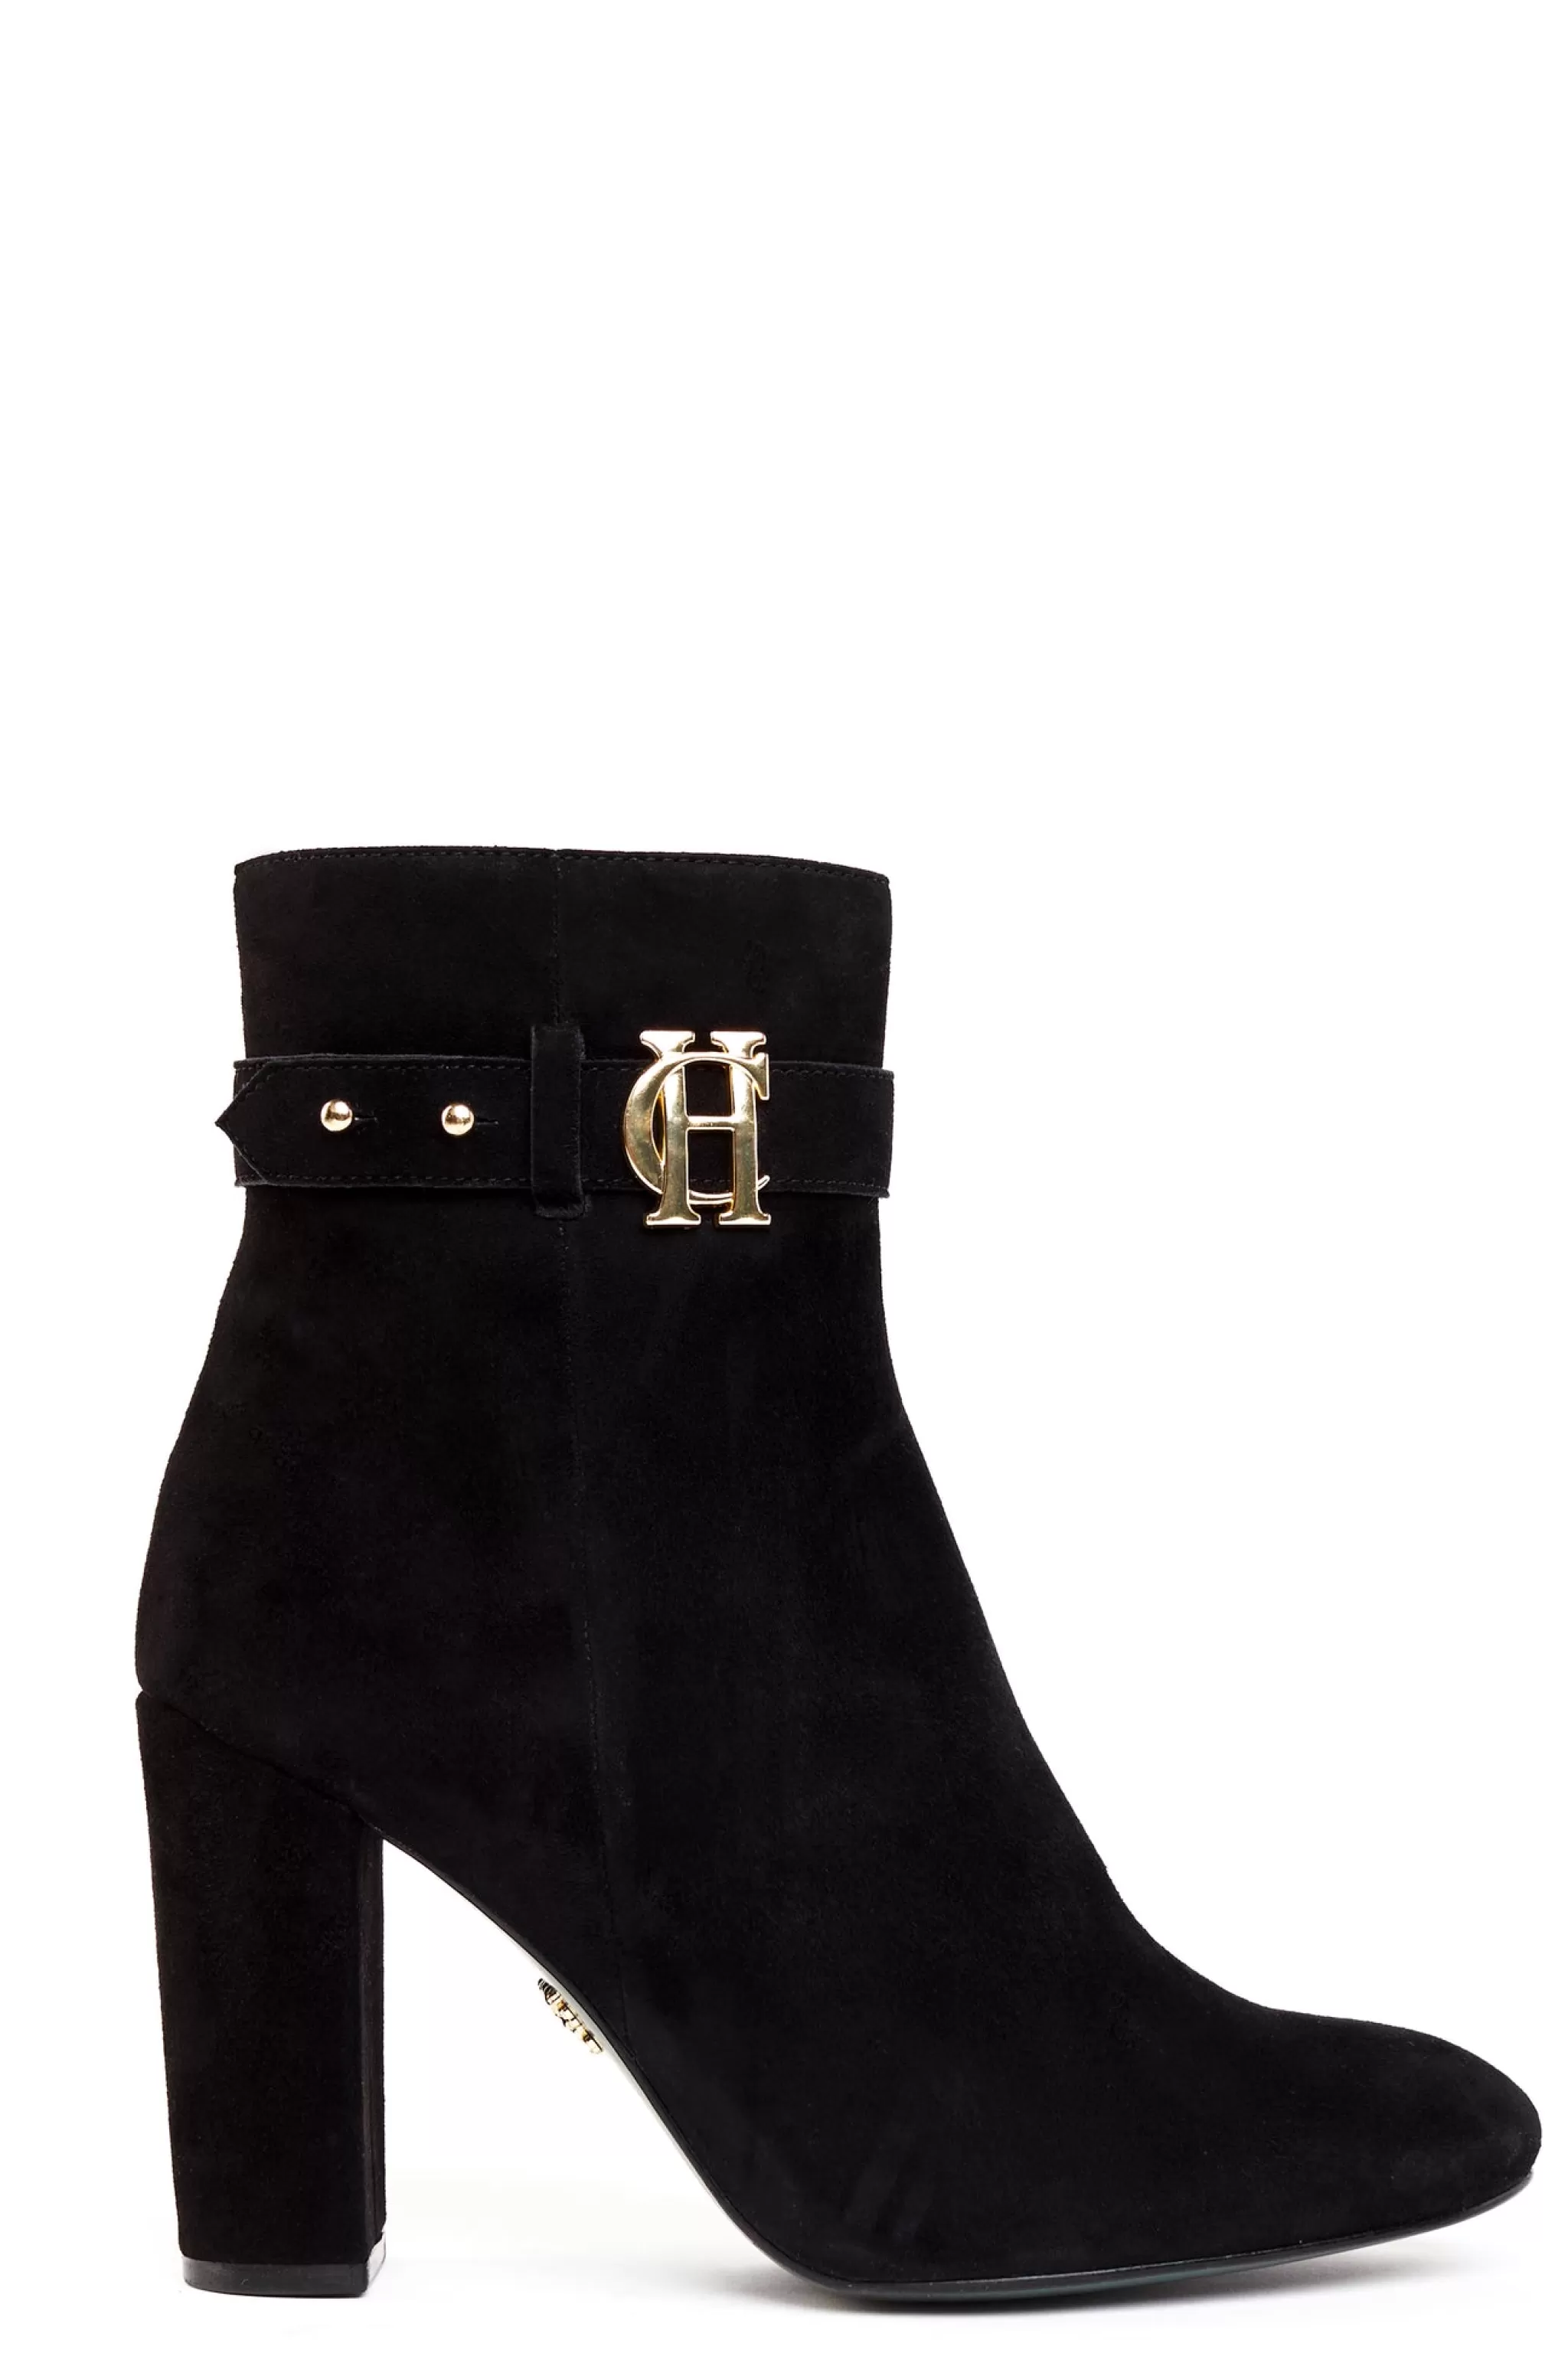 Mayfair Suede Ankle Boot>Holland Cooper Discount